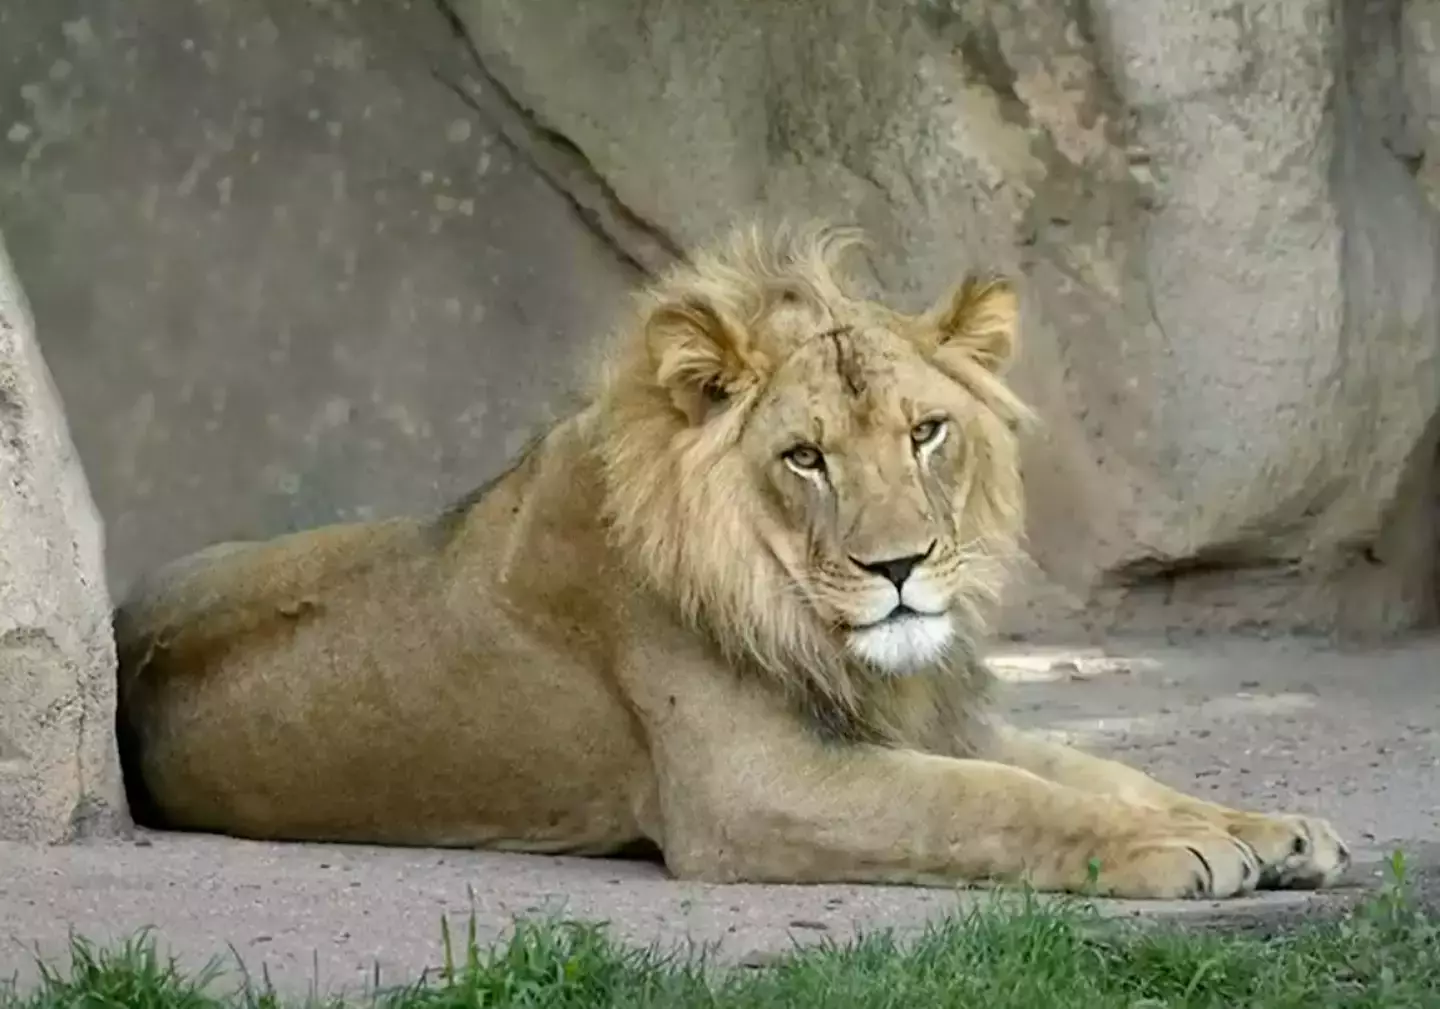 One lioness certainly caused a stir by being different. (YouTube/WIBW 13 News)